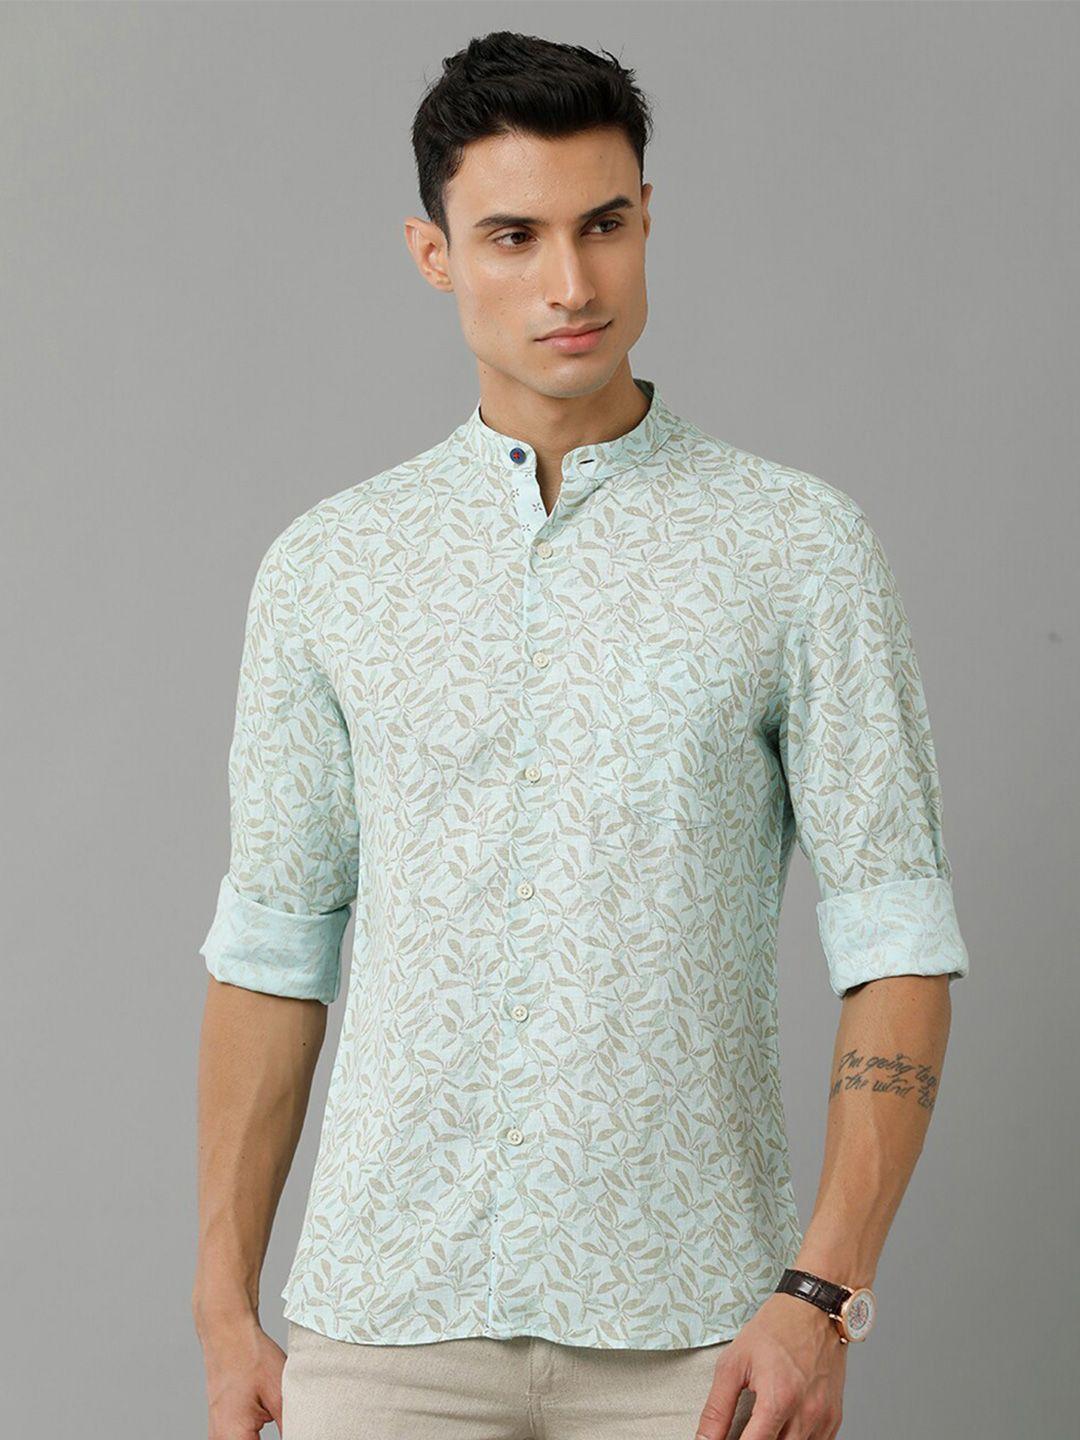 linen-club-floral-printed-band-collar-pure-linen-casual-shirt